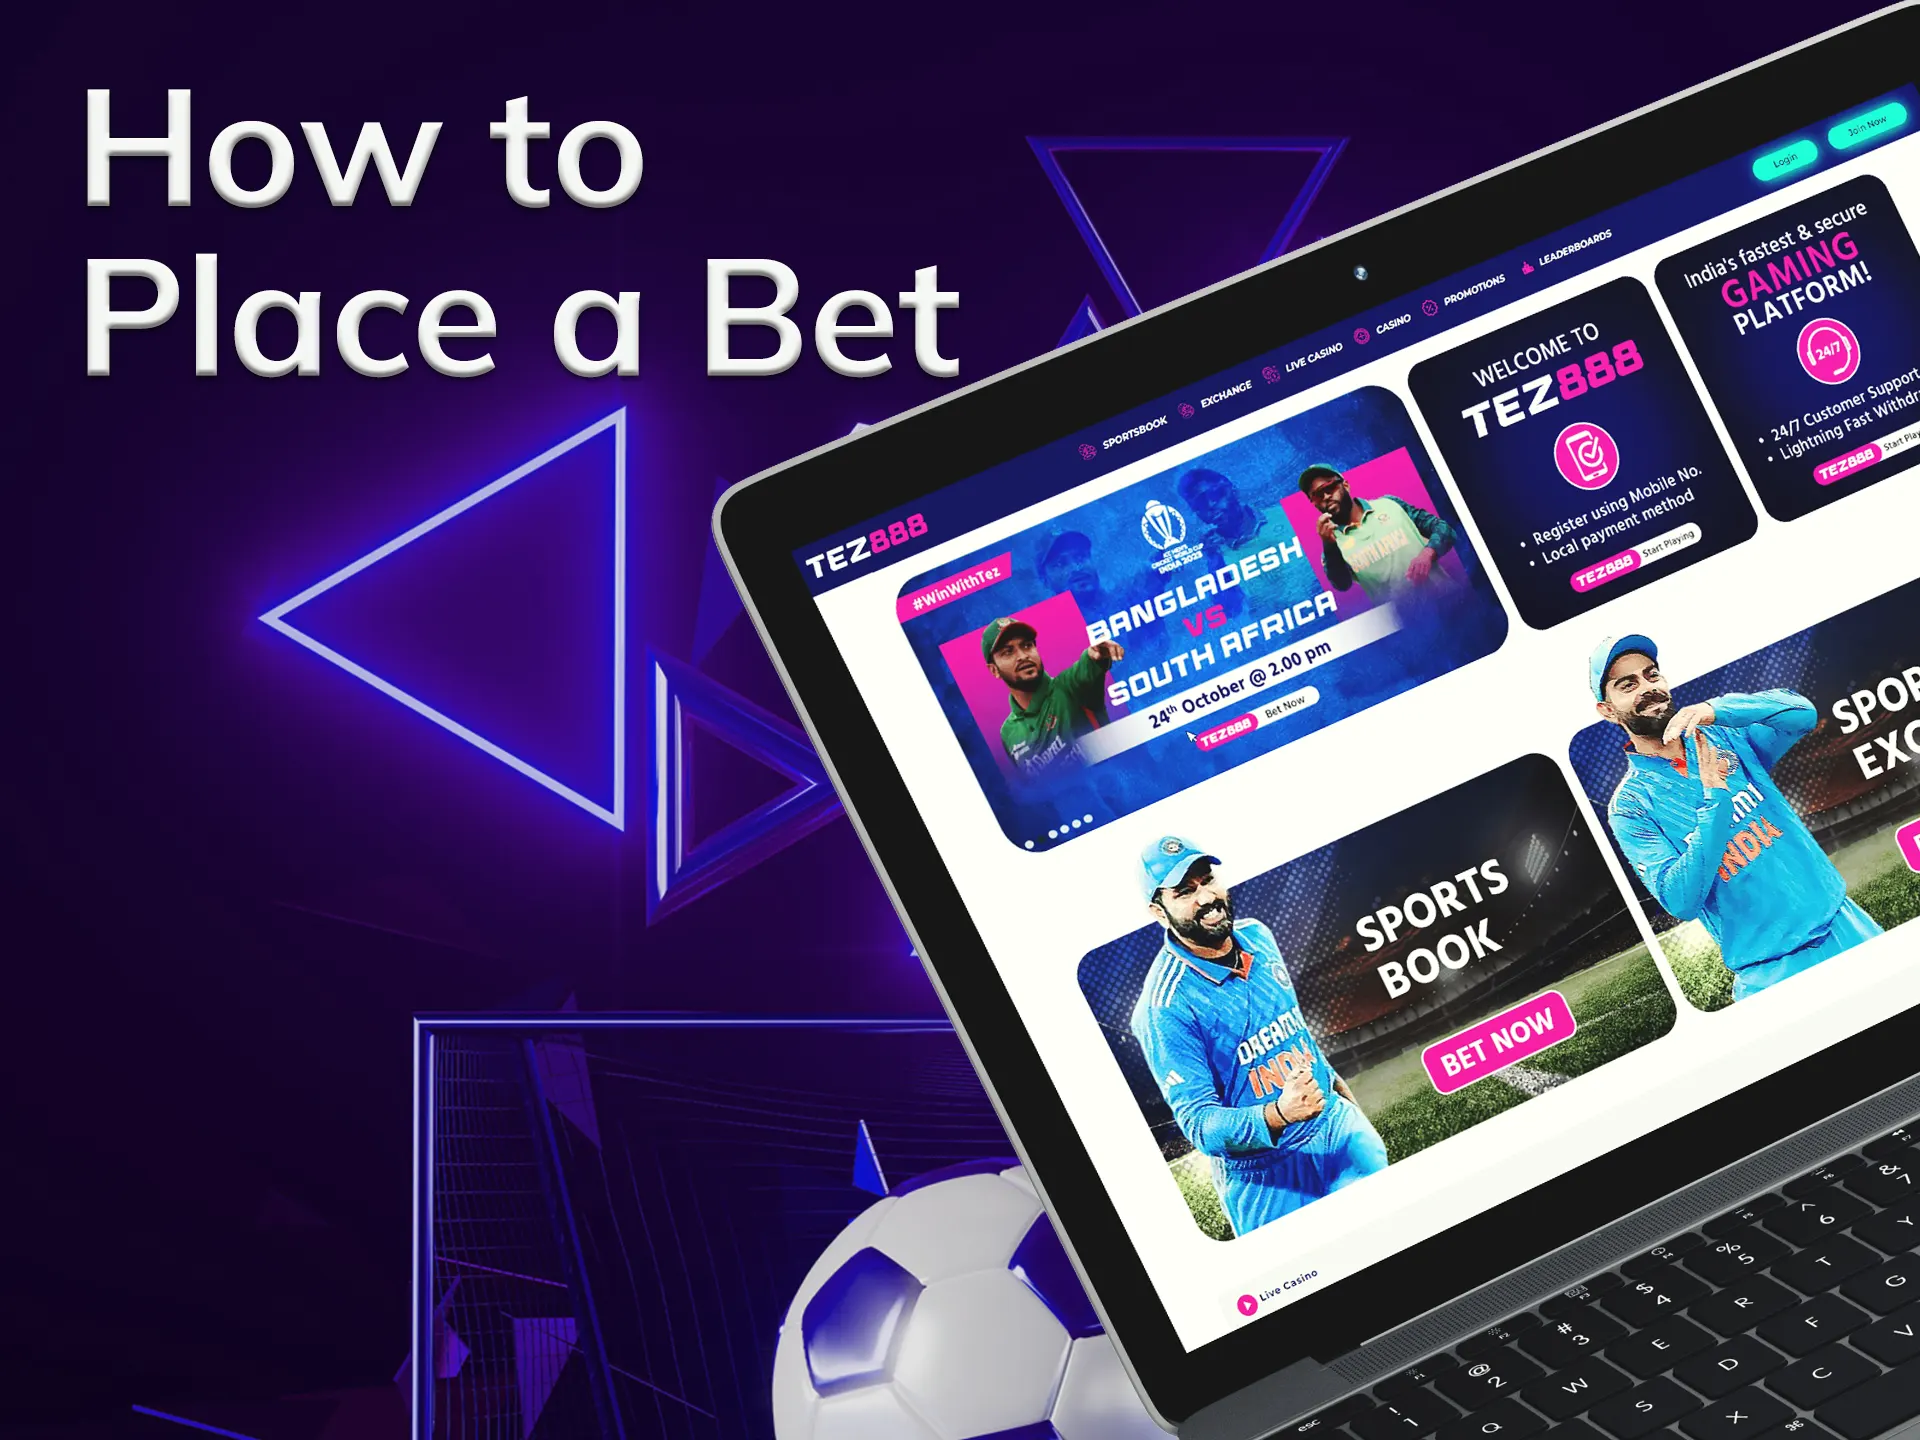 Find out how to bet on tez888.